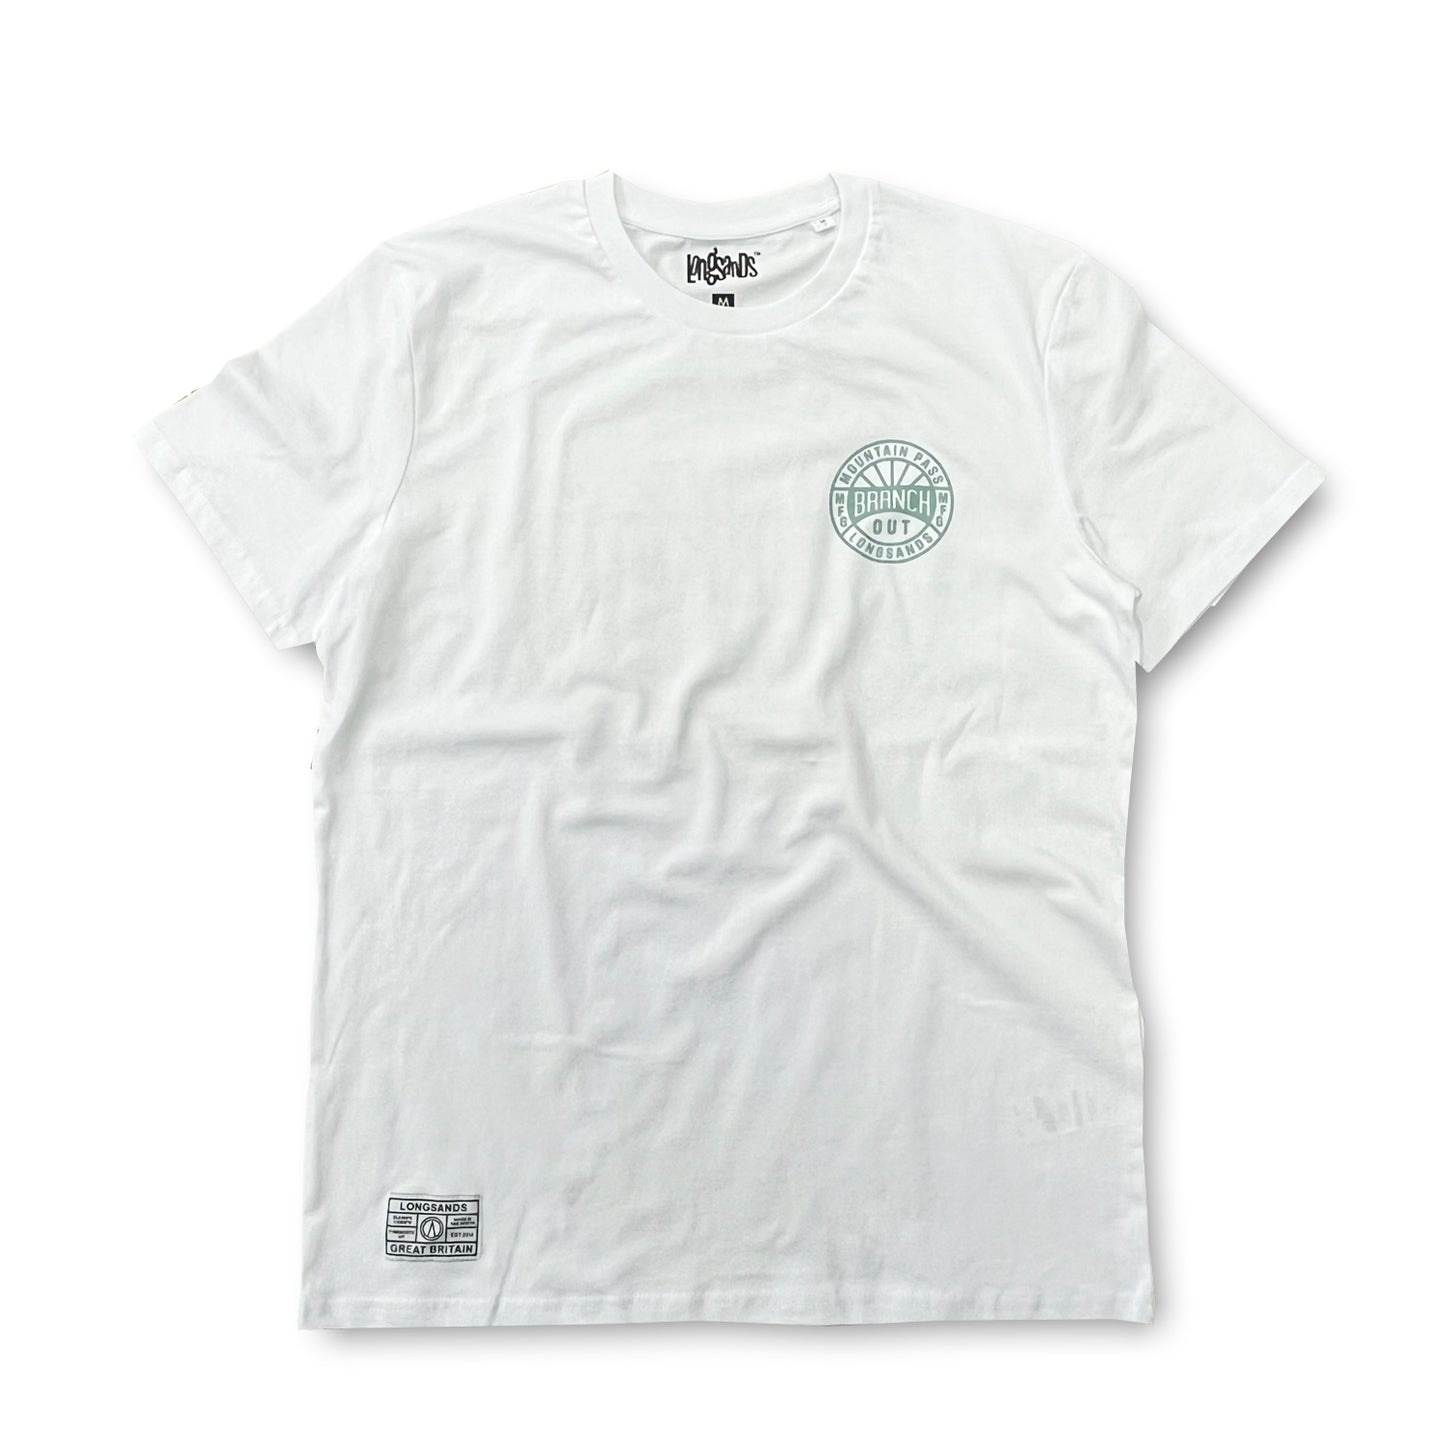 Branch Out Eco Tee - White